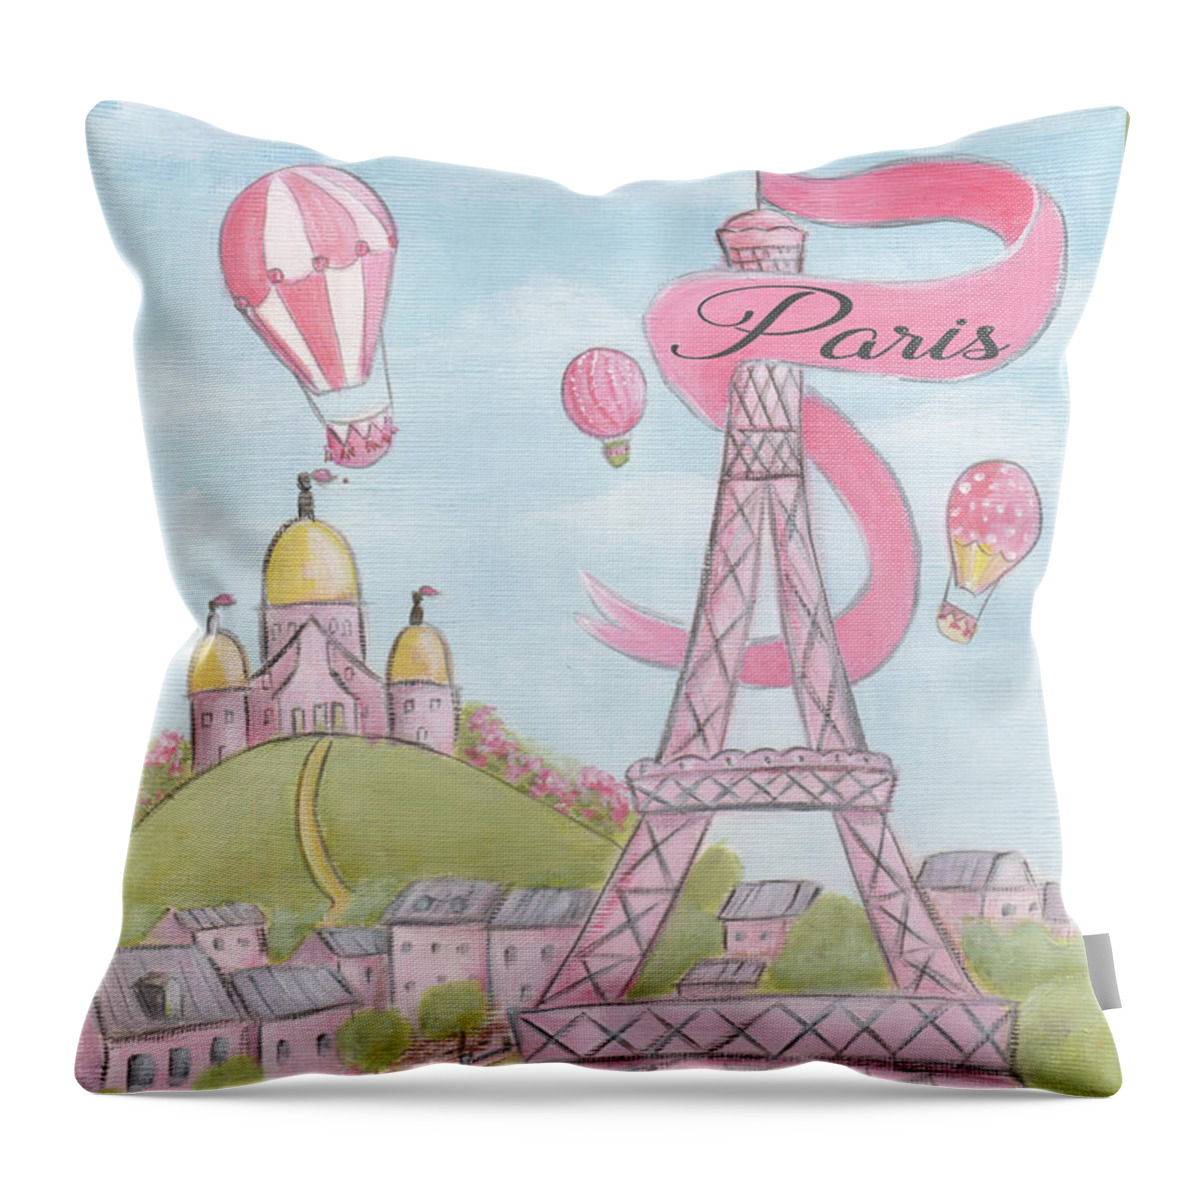 Eiffel Tower Throw Pillow featuring the painting Pink Eiffel Tower With Hot Air Balloons by Debbie Cerone